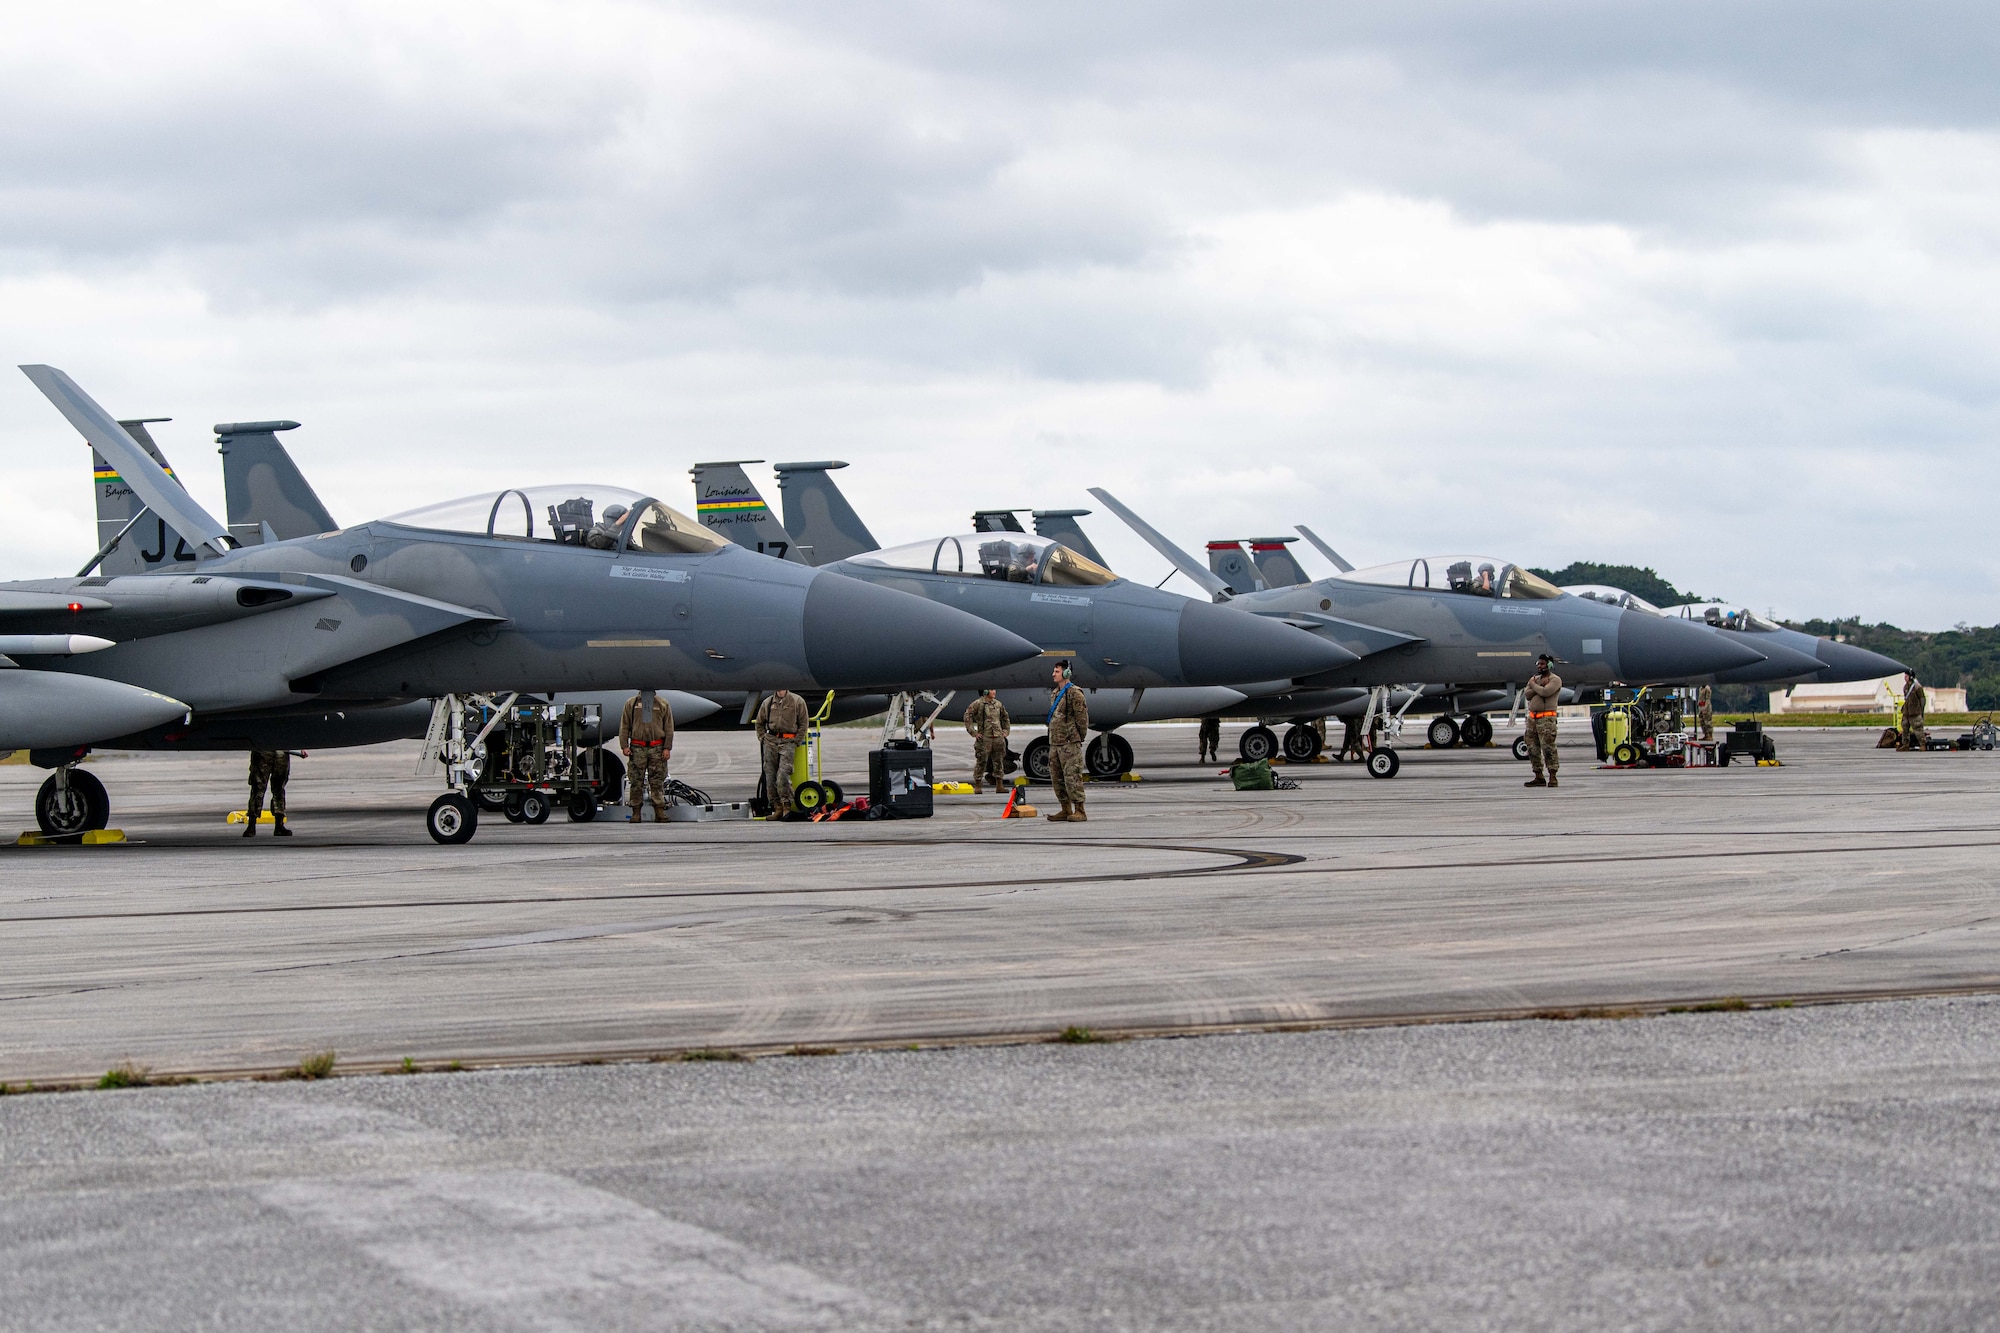 Five F-15C Eagles sit stationary side by side.